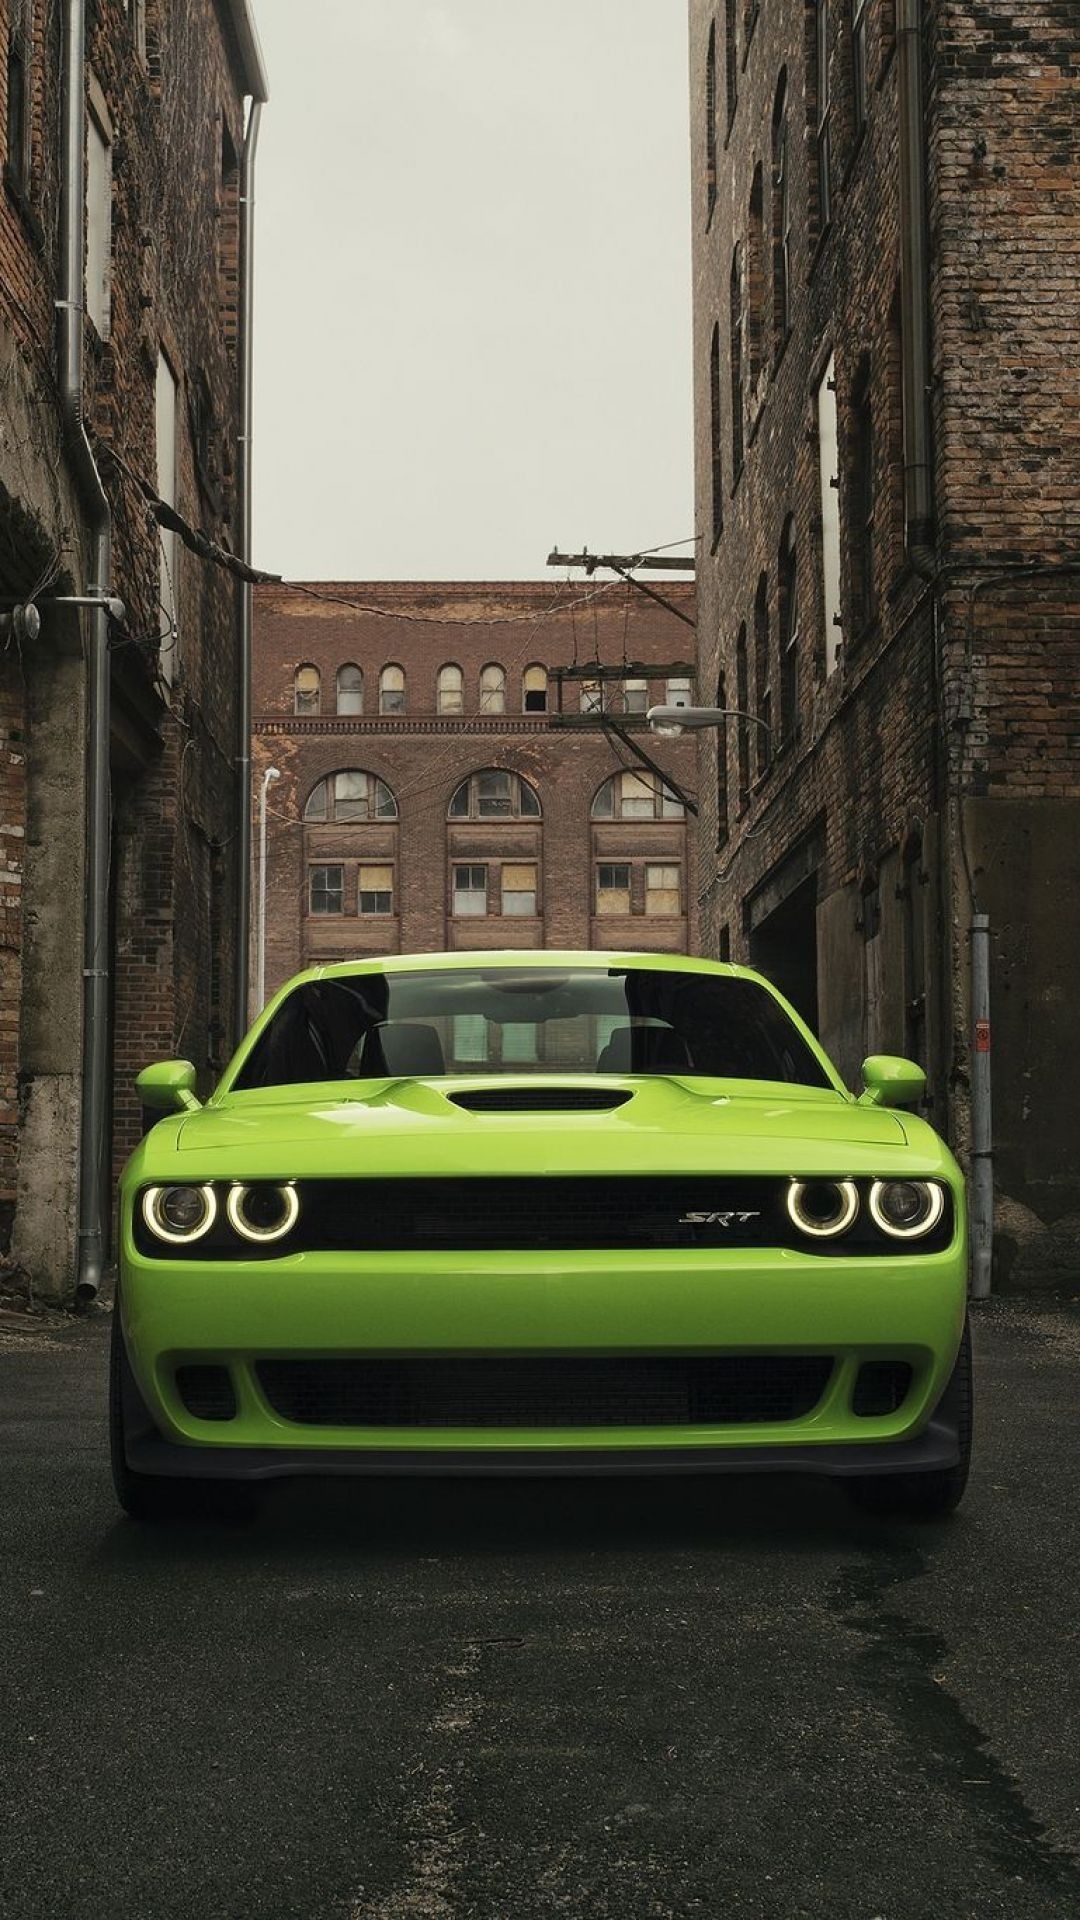 Dodge Challenger SRT Hellcat, High-definition wallpapers, Iconic muscle car, 1080x1920 Full HD Phone